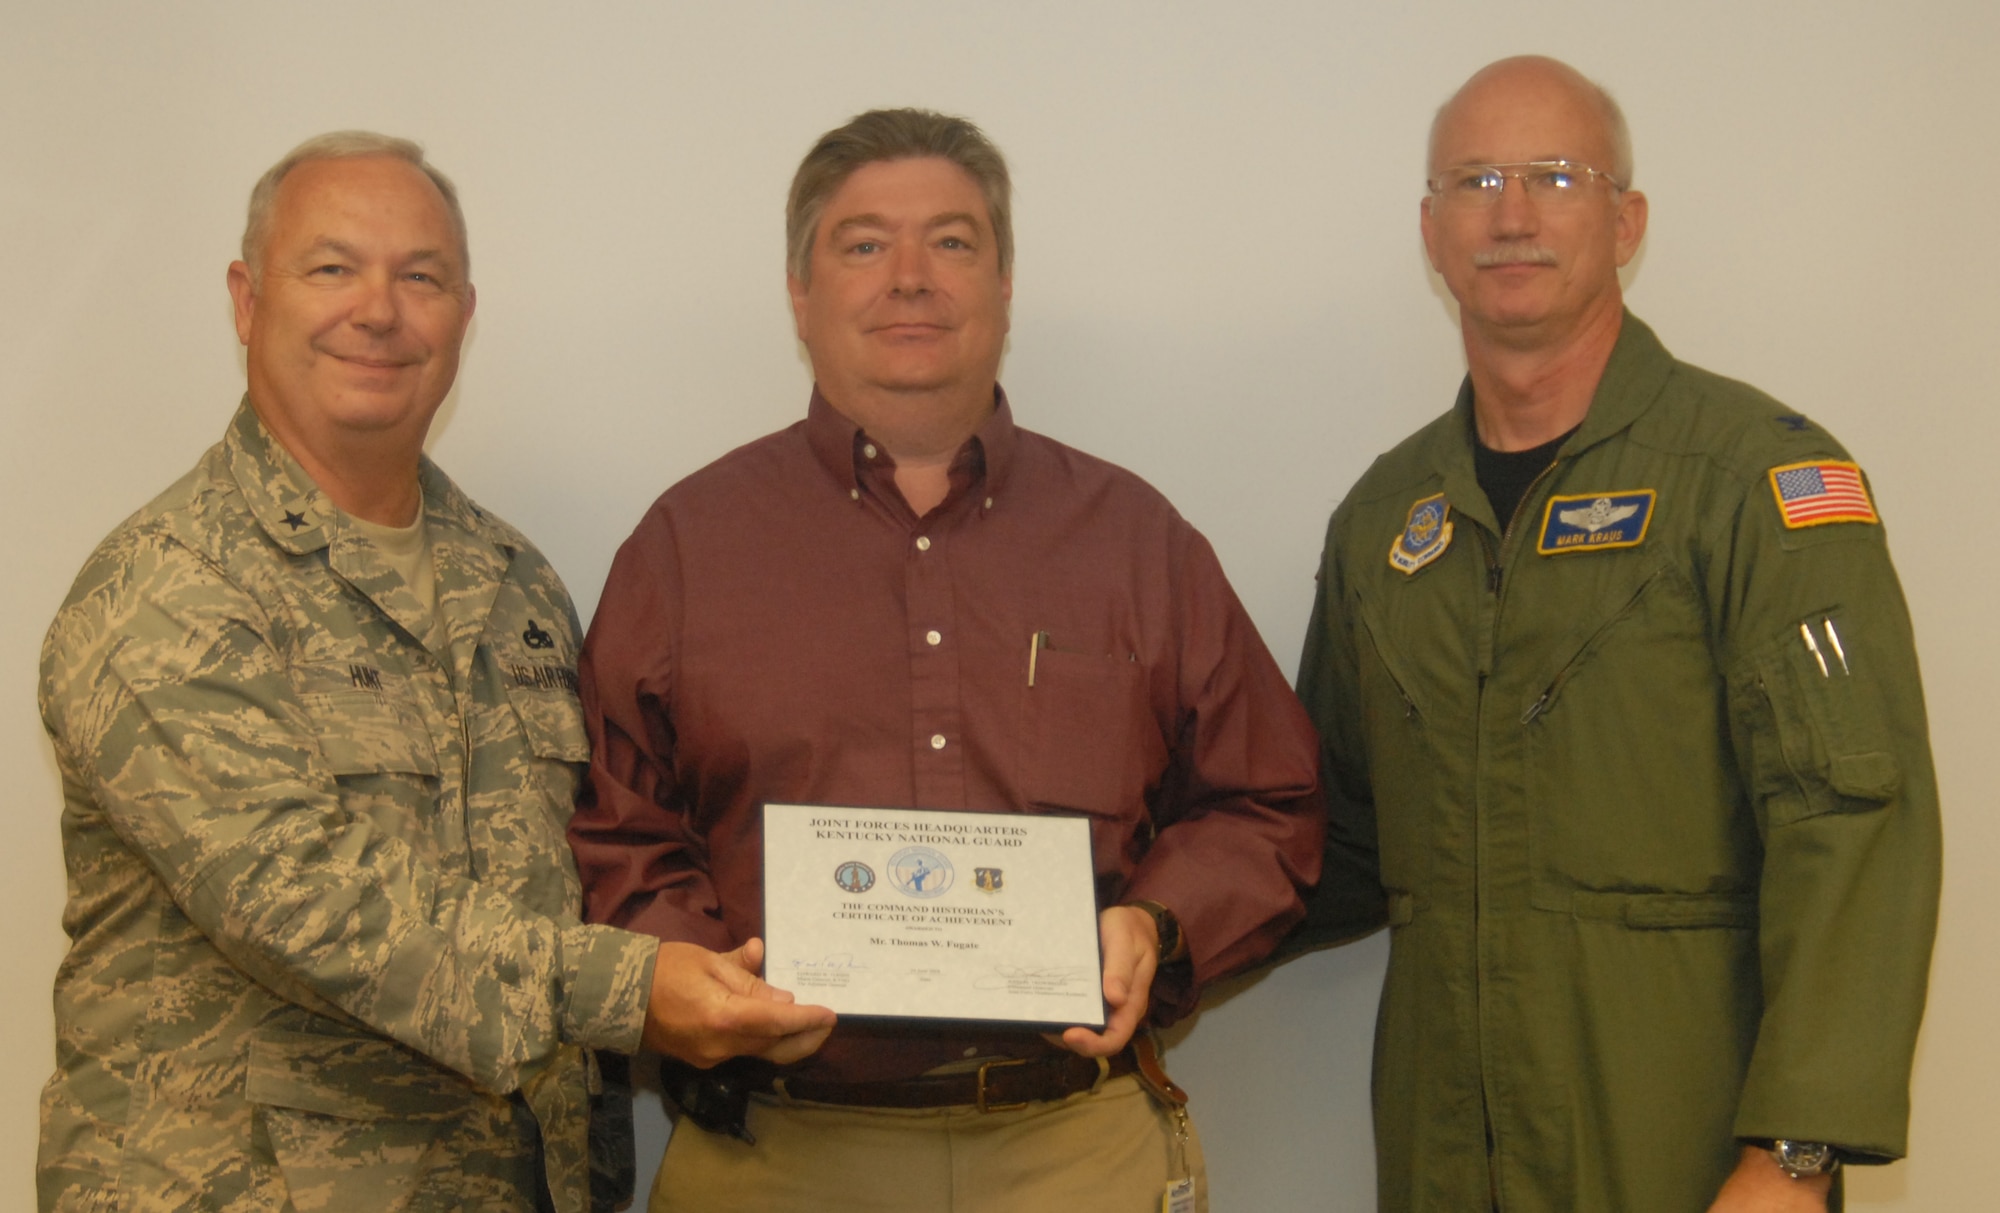 Mr. Thomas W. Fugate receives the Historian’s Certificate of Achievement, presented by Brig. Gen. Howard P. Hunt, III, Kentucky Air National Guard Assistant Adjutant General, and Col. Mark R. Kraus, 123rd Airlift Wing Commander - photo by Tech. Sgt. Philip S. Speck